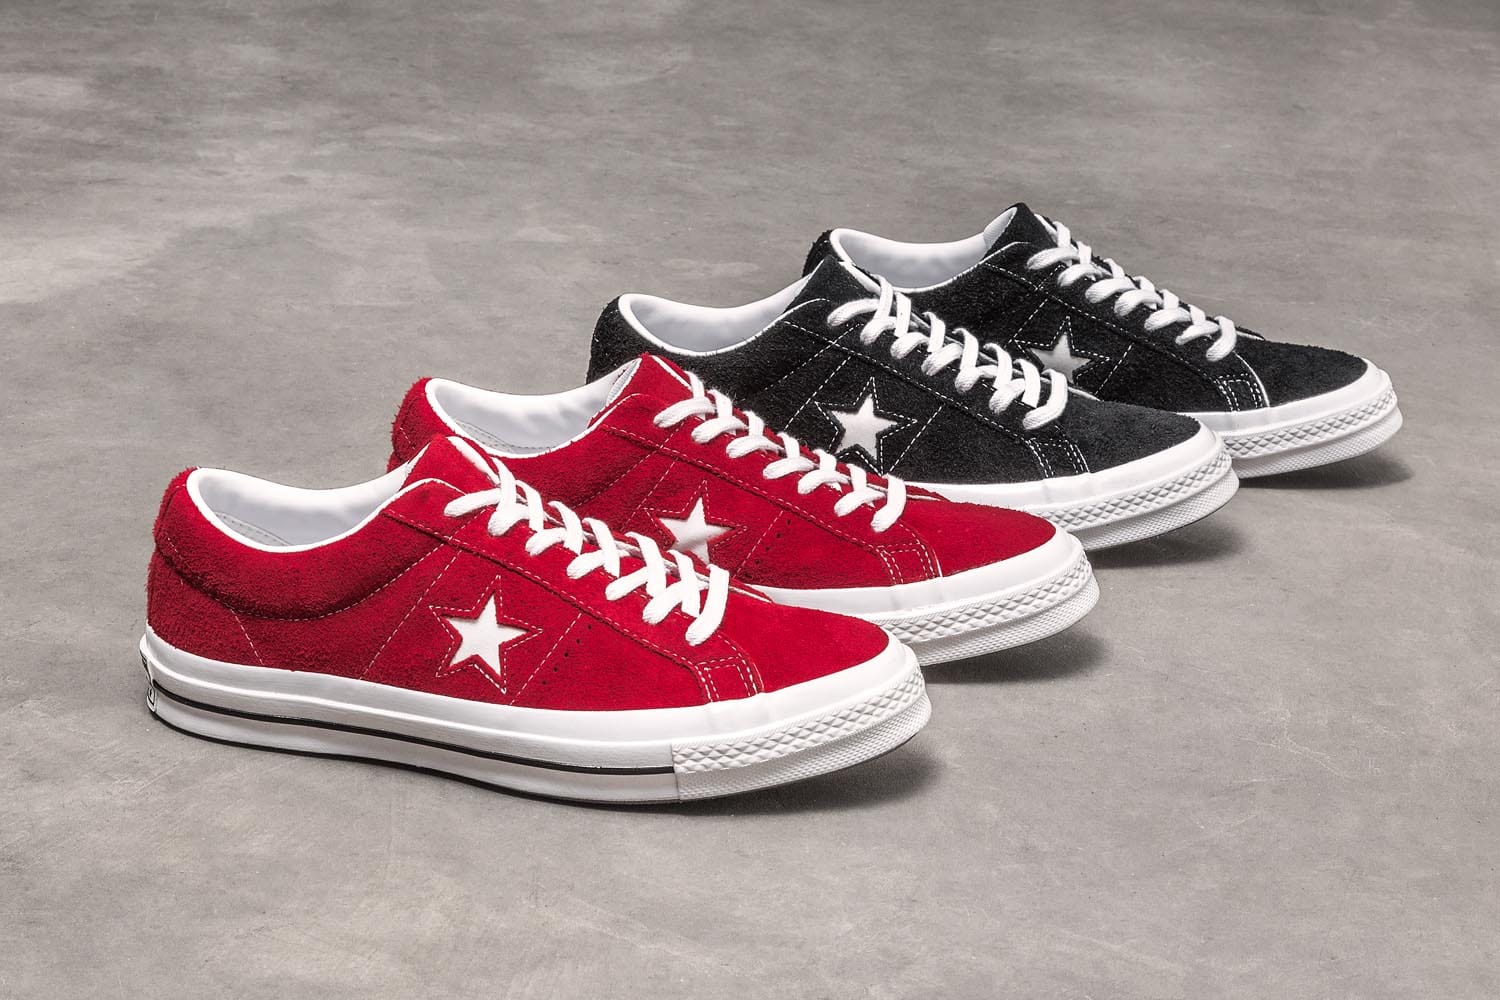 History Behind the Converse One Star 